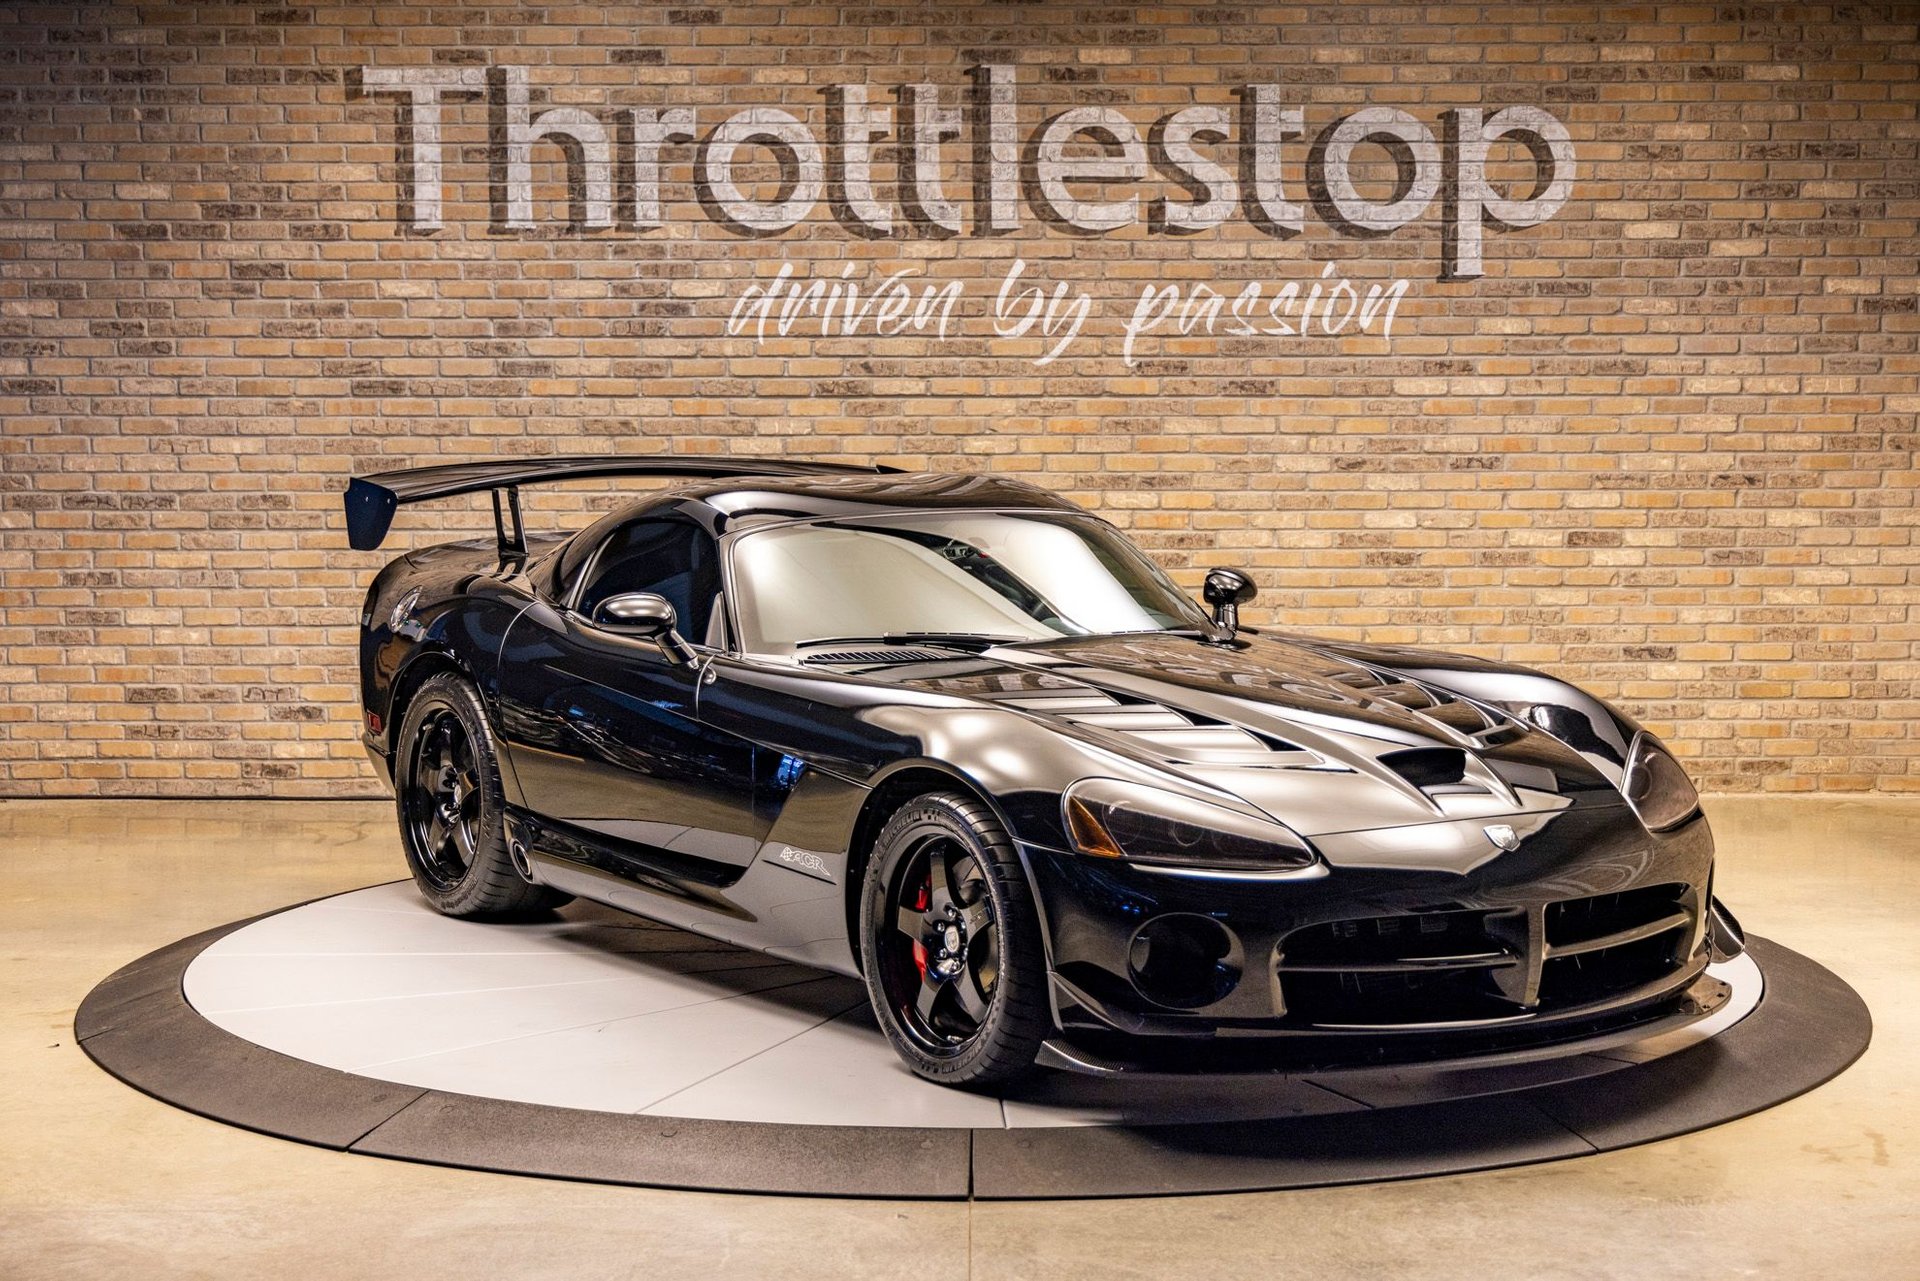 813228 | 2009 Dodge Viper ACR | Throttlestop | Automotive and Motorcycle Consignment Dealer